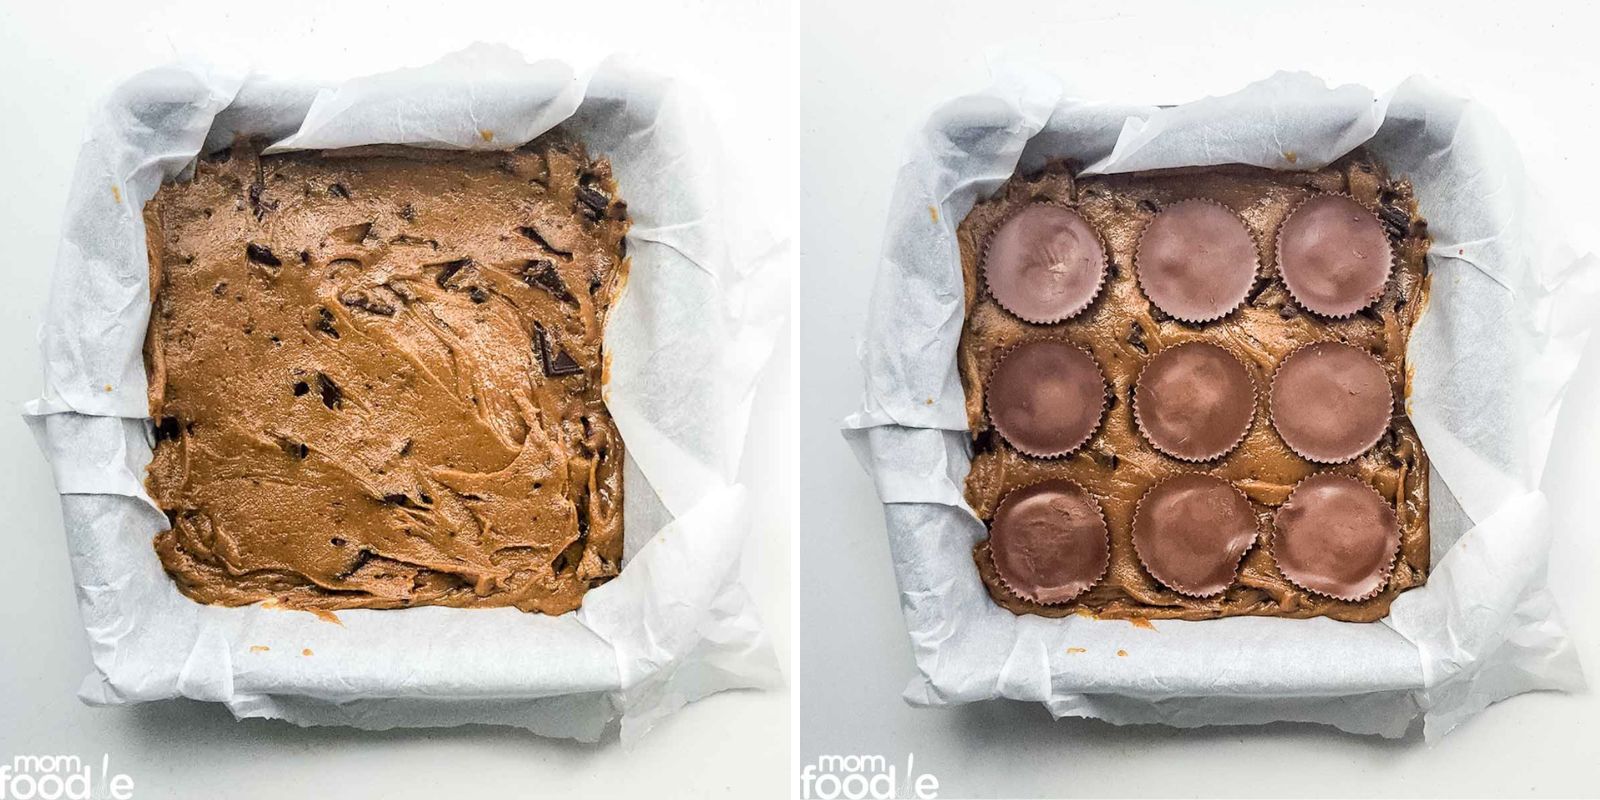 left: blondie dough spread out in prepared baking dish
right: Reese's peanut butter cups pressed into batter